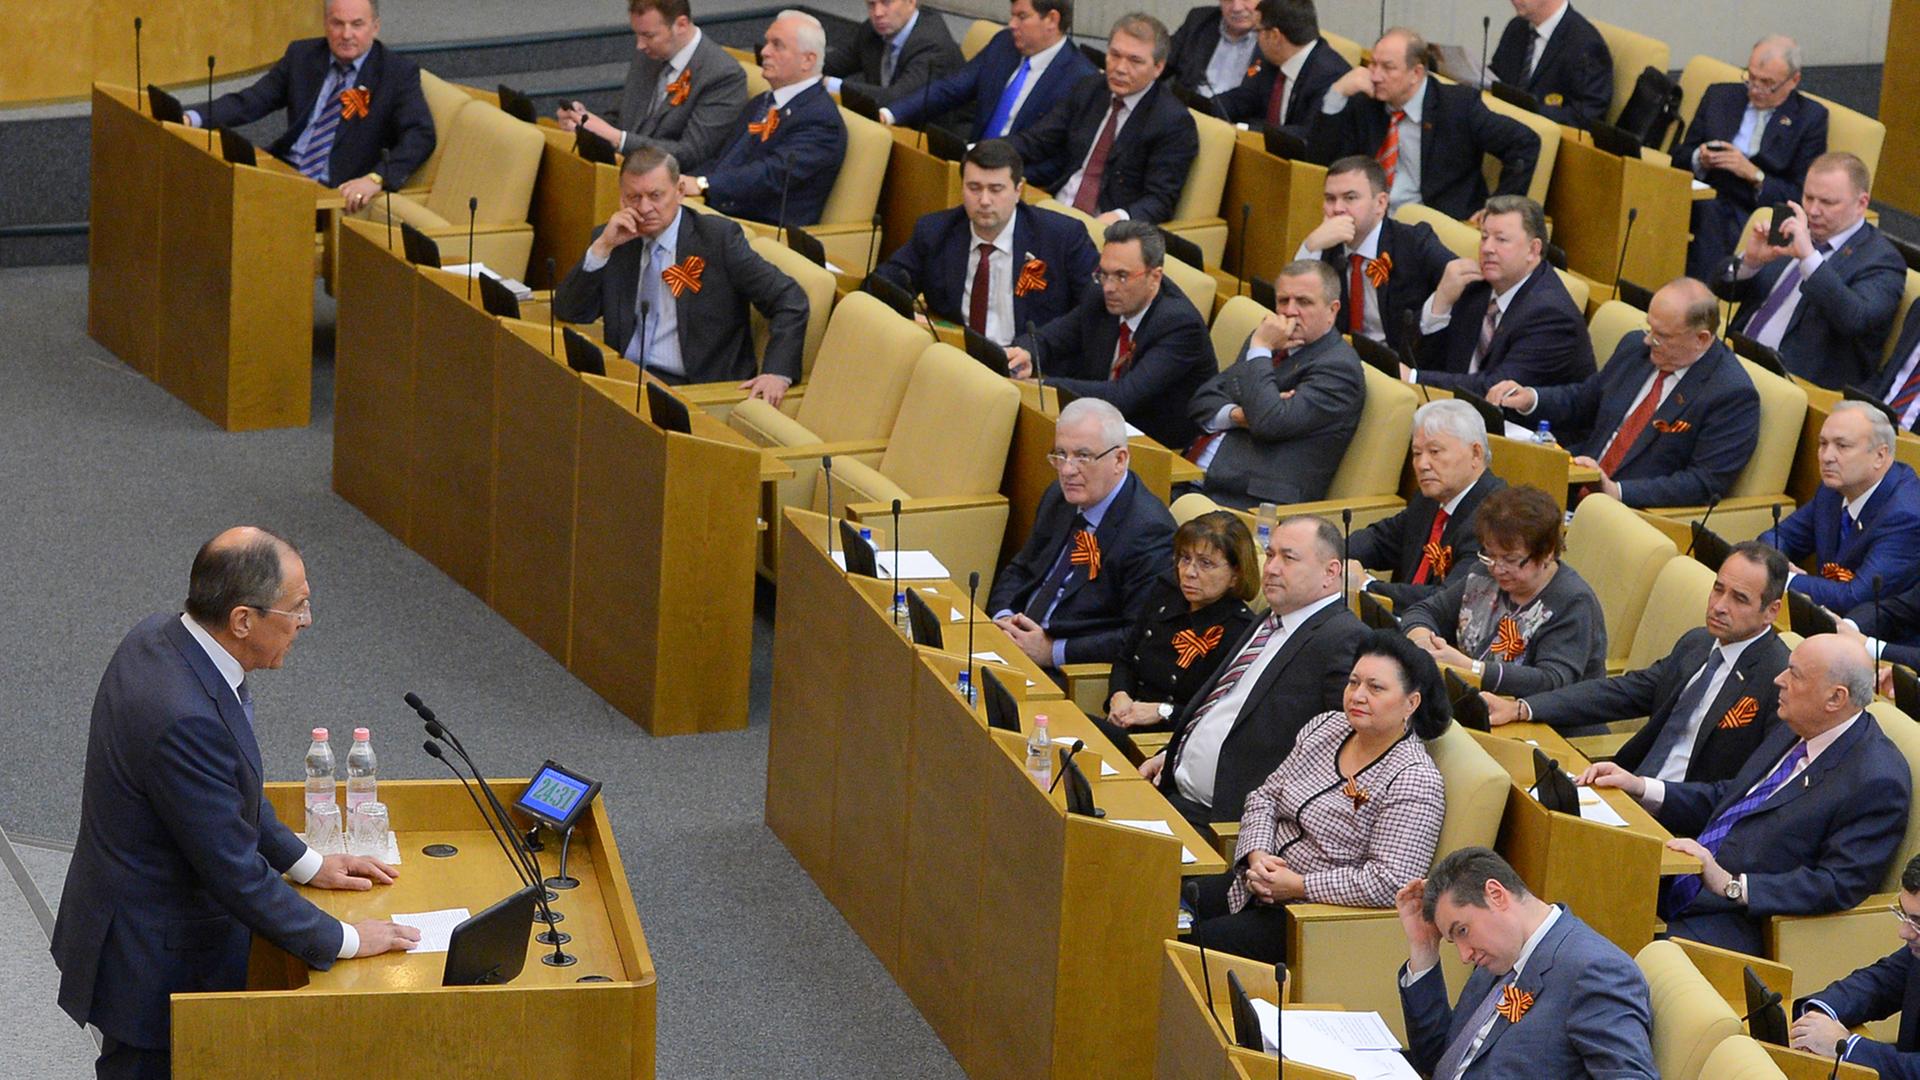 Foreign Minister Sergei Lavrov speaking at the State Duma's extraordinary plenary meeting convened to ratify the Treaty on the Adoption of the Republic of Crimea to the Russian Federation and the Formation of New Subjects. Vladimir Fedorenko